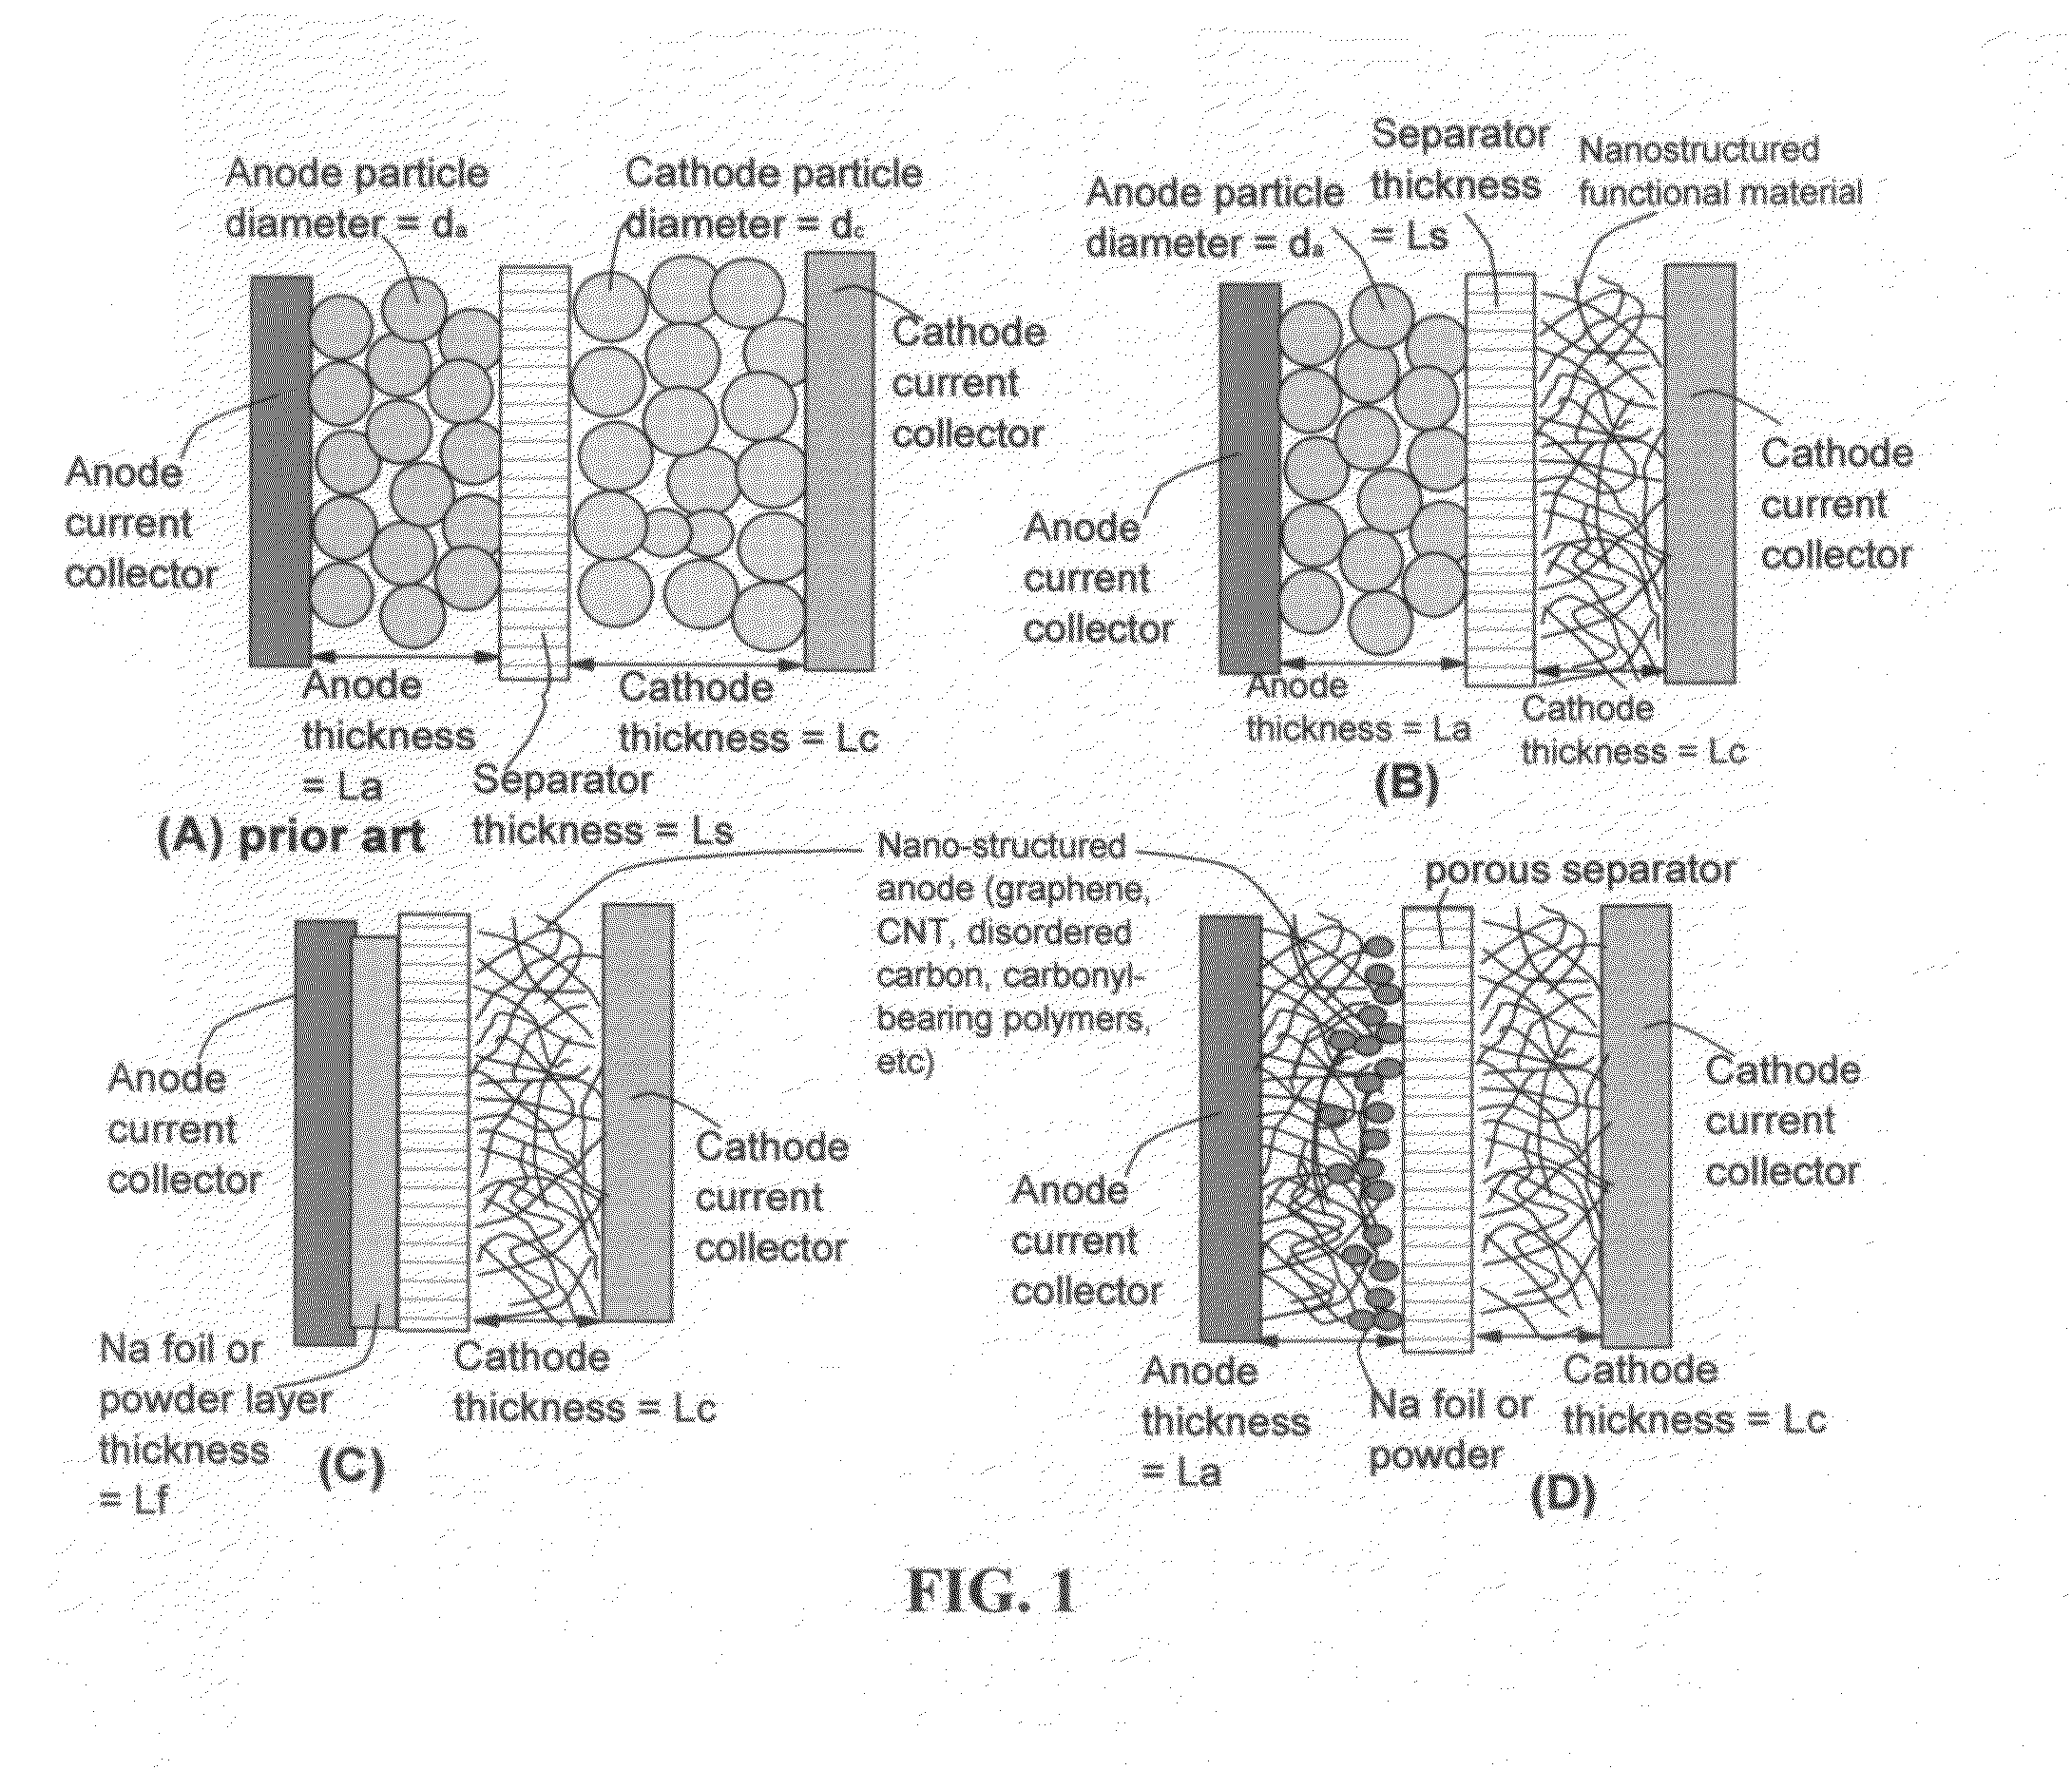 Partially and fully surface-enabled alkali metal ion-exchanging energy storage devices